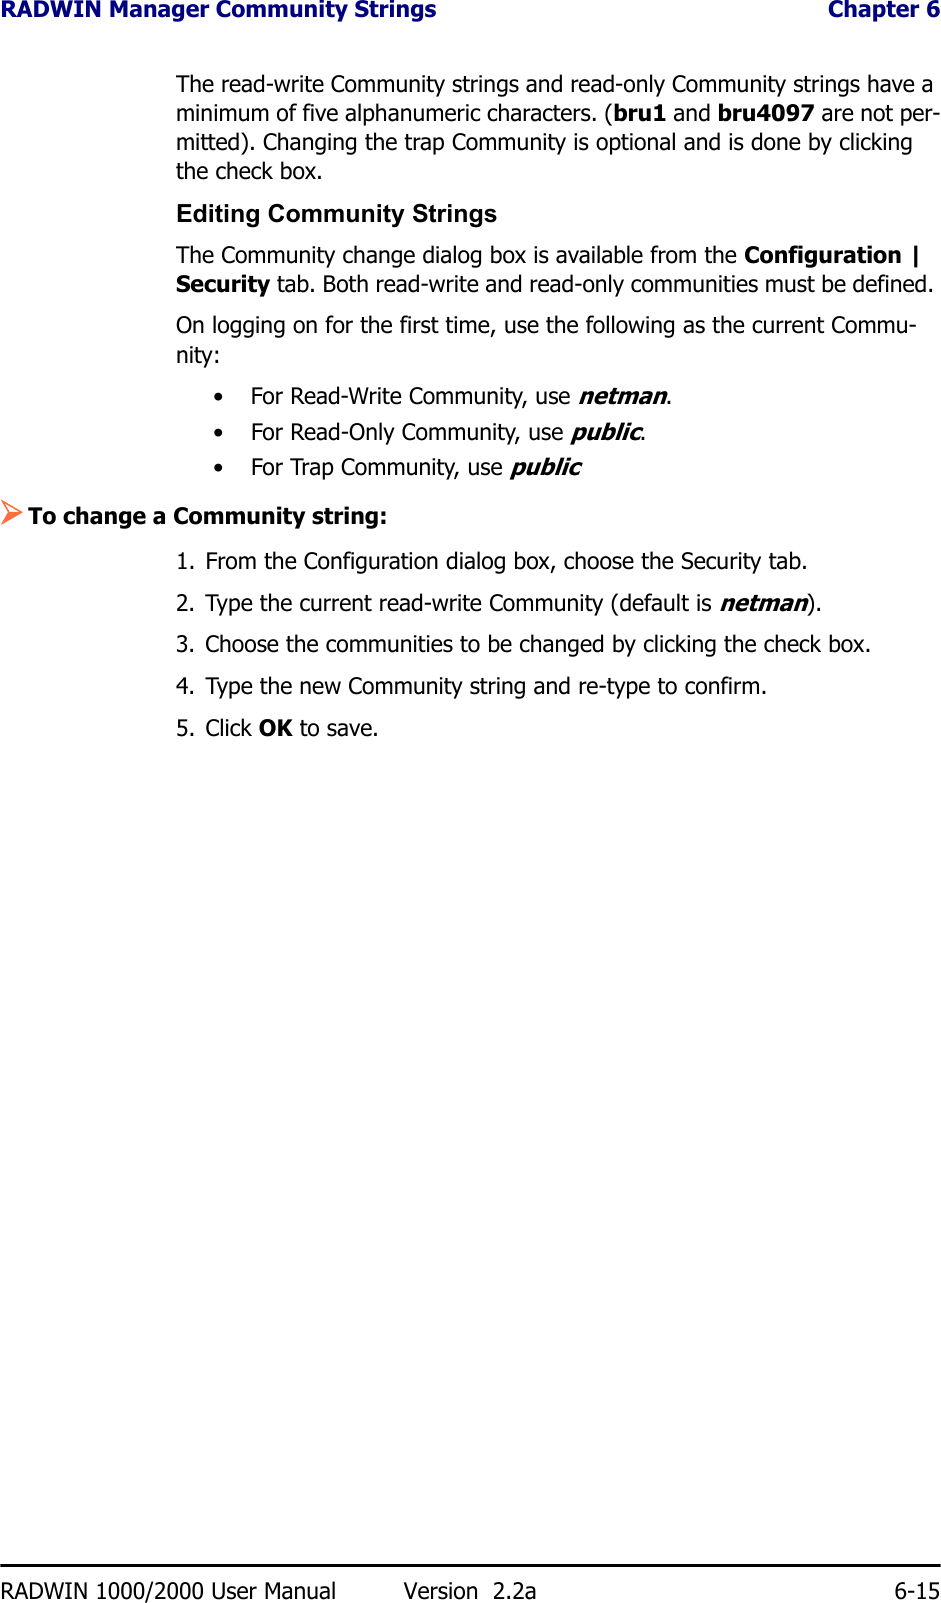 RADWIN Manager Community Strings  Chapter 6RADWIN 1000/2000 User Manual Version  2.2a 6-15The read-write Community strings and read-only Community strings have a minimum of five alphanumeric characters. (bru1 and bru4097 are not per-mitted). Changing the trap Community is optional and is done by clicking the check box.Editing Community StringsThe Community change dialog box is available from the Configuration | Security tab. Both read-write and read-only communities must be defined. On logging on for the first time, use the following as the current Commu-nity:• For Read-Write Community, use netman. • For Read-Only Community, use public.• For Trap Community, use public¾To change a Community string:1. From the Configuration dialog box, choose the Security tab.2. Type the current read-write Community (default is netman).3. Choose the communities to be changed by clicking the check box.4. Type the new Community string and re-type to confirm.5. Click OK to save.